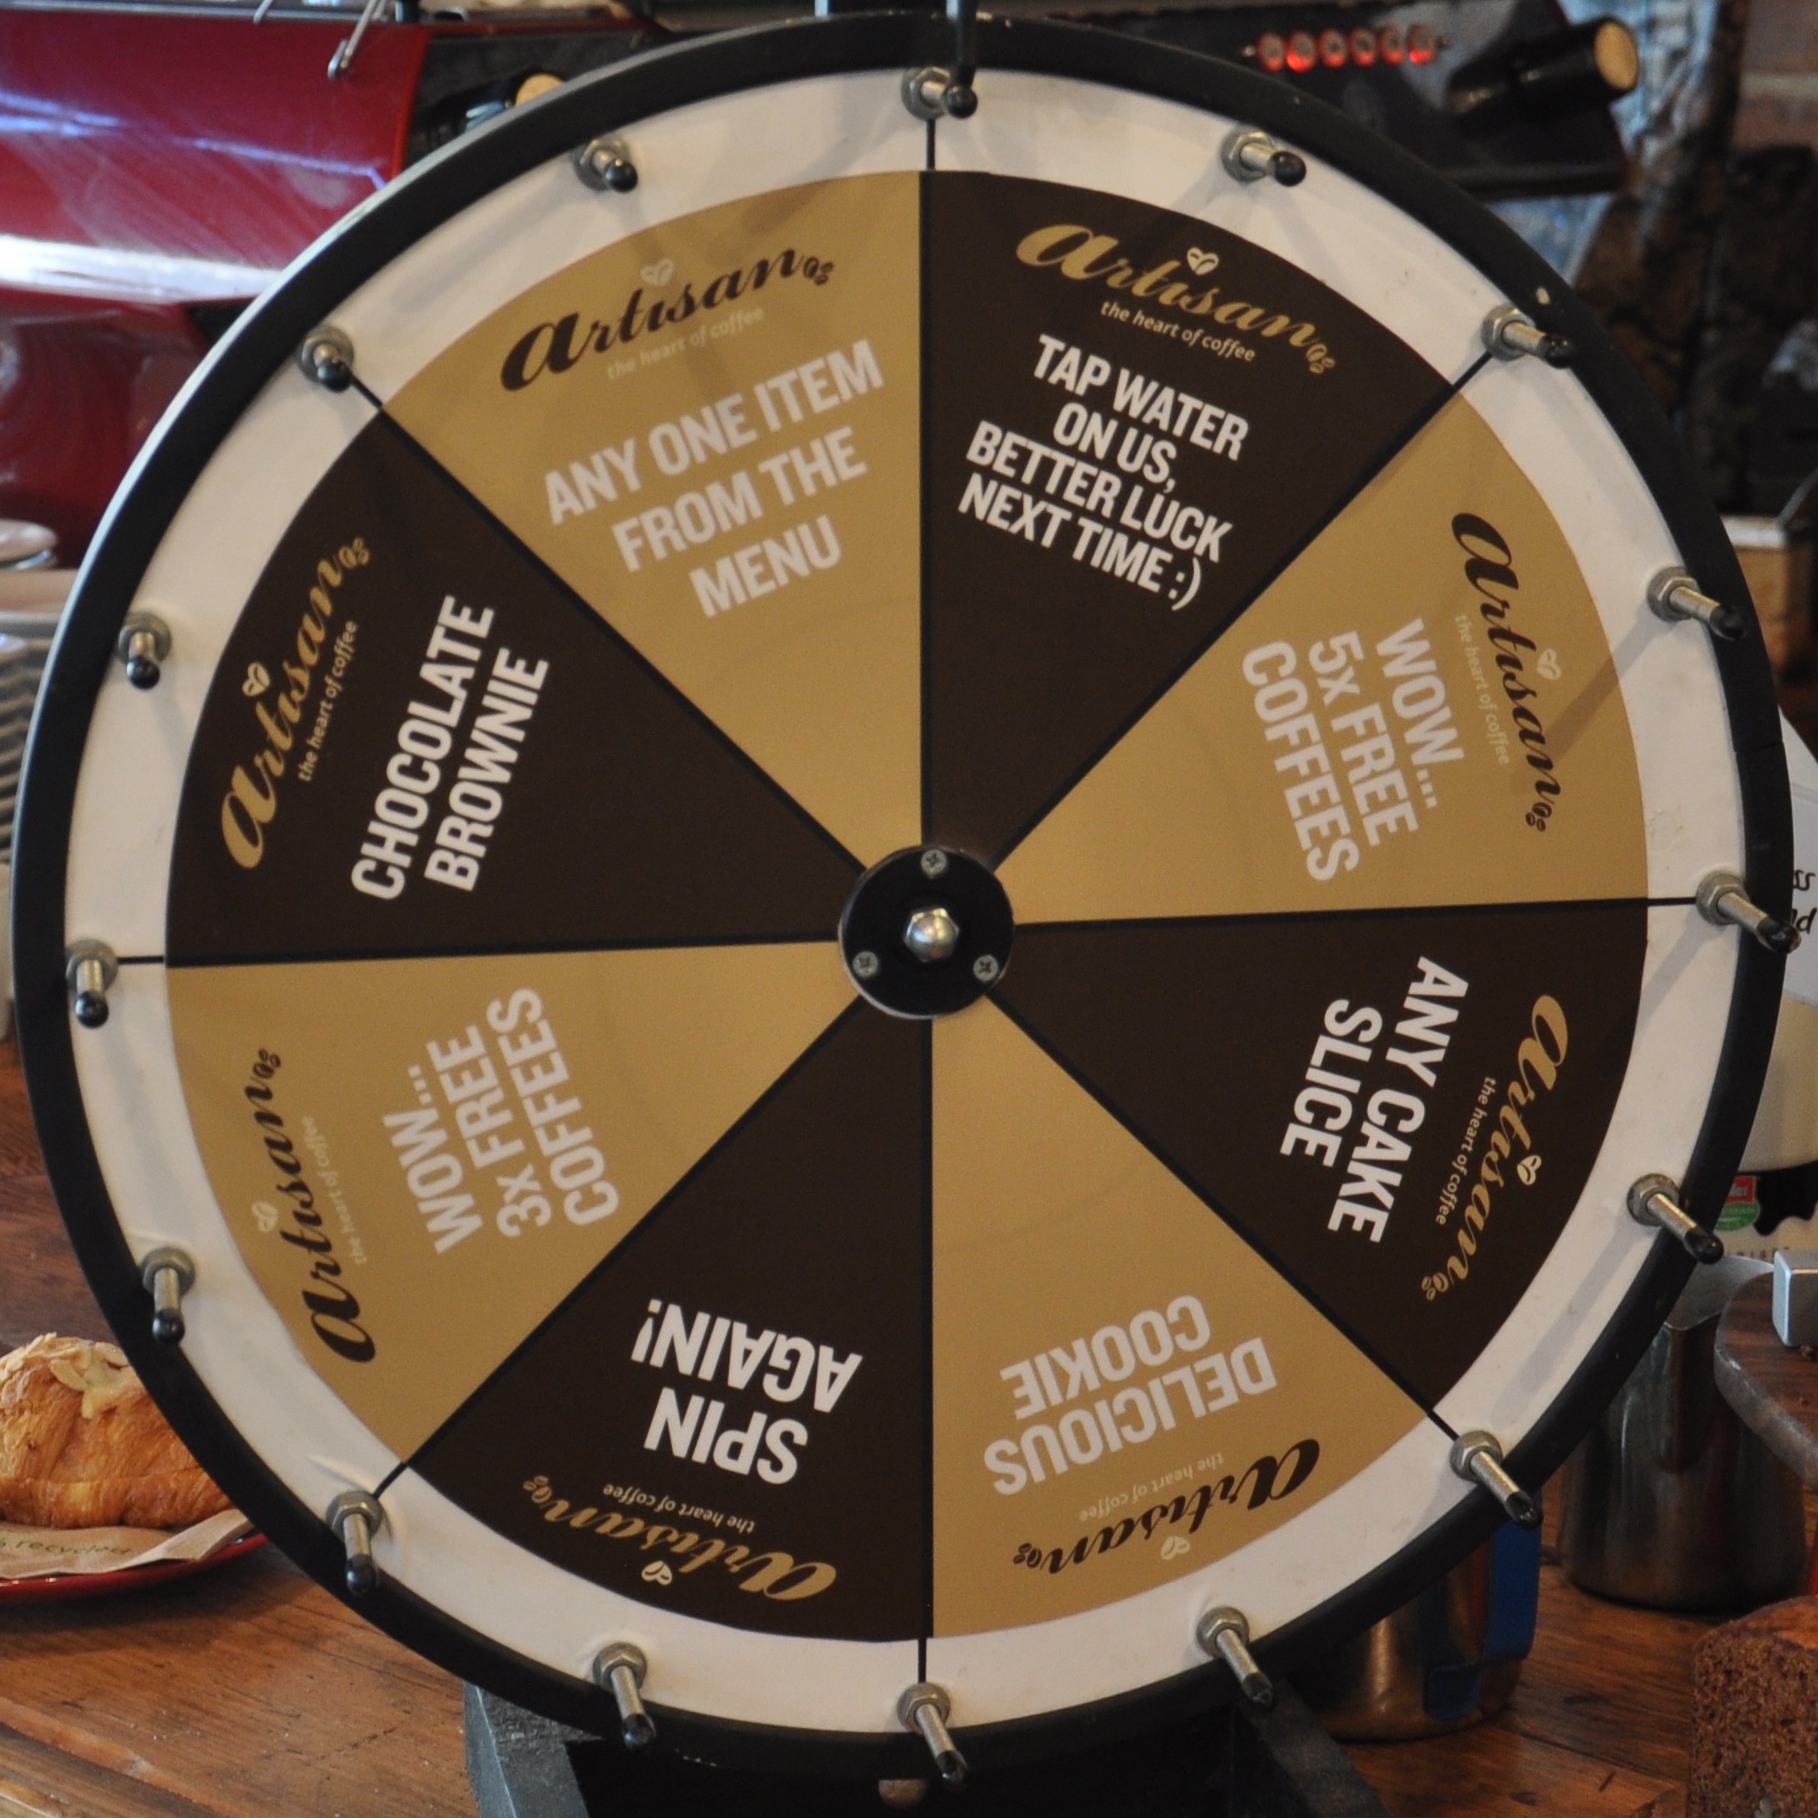 An eight segment wheel with various rewards such as free coffee, cake or any item from the menu.